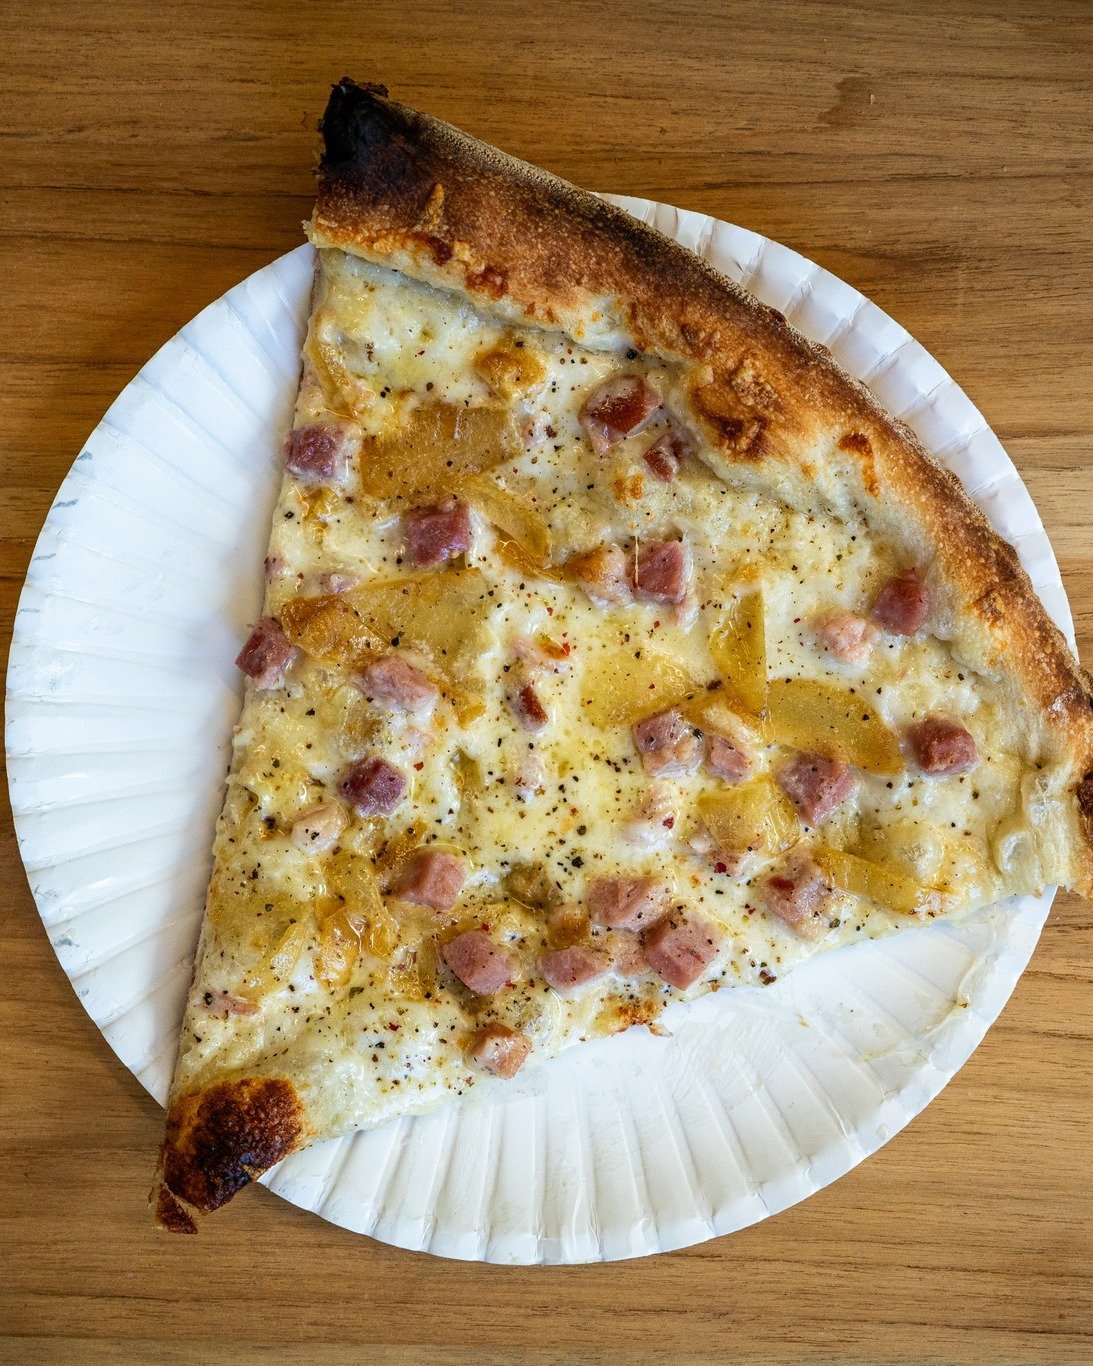 ONLY A COUPLE DAYS LEFT TO PRACTICE YOUR FRENCH!

Oui Monsieur: Garlic Cream sauce, topped with mozzarella, ham, gruyere, caramelized onion, and a peppercorn medley. 

Available everyday by the slice and full pie for the month of April!

 #frenchcuis